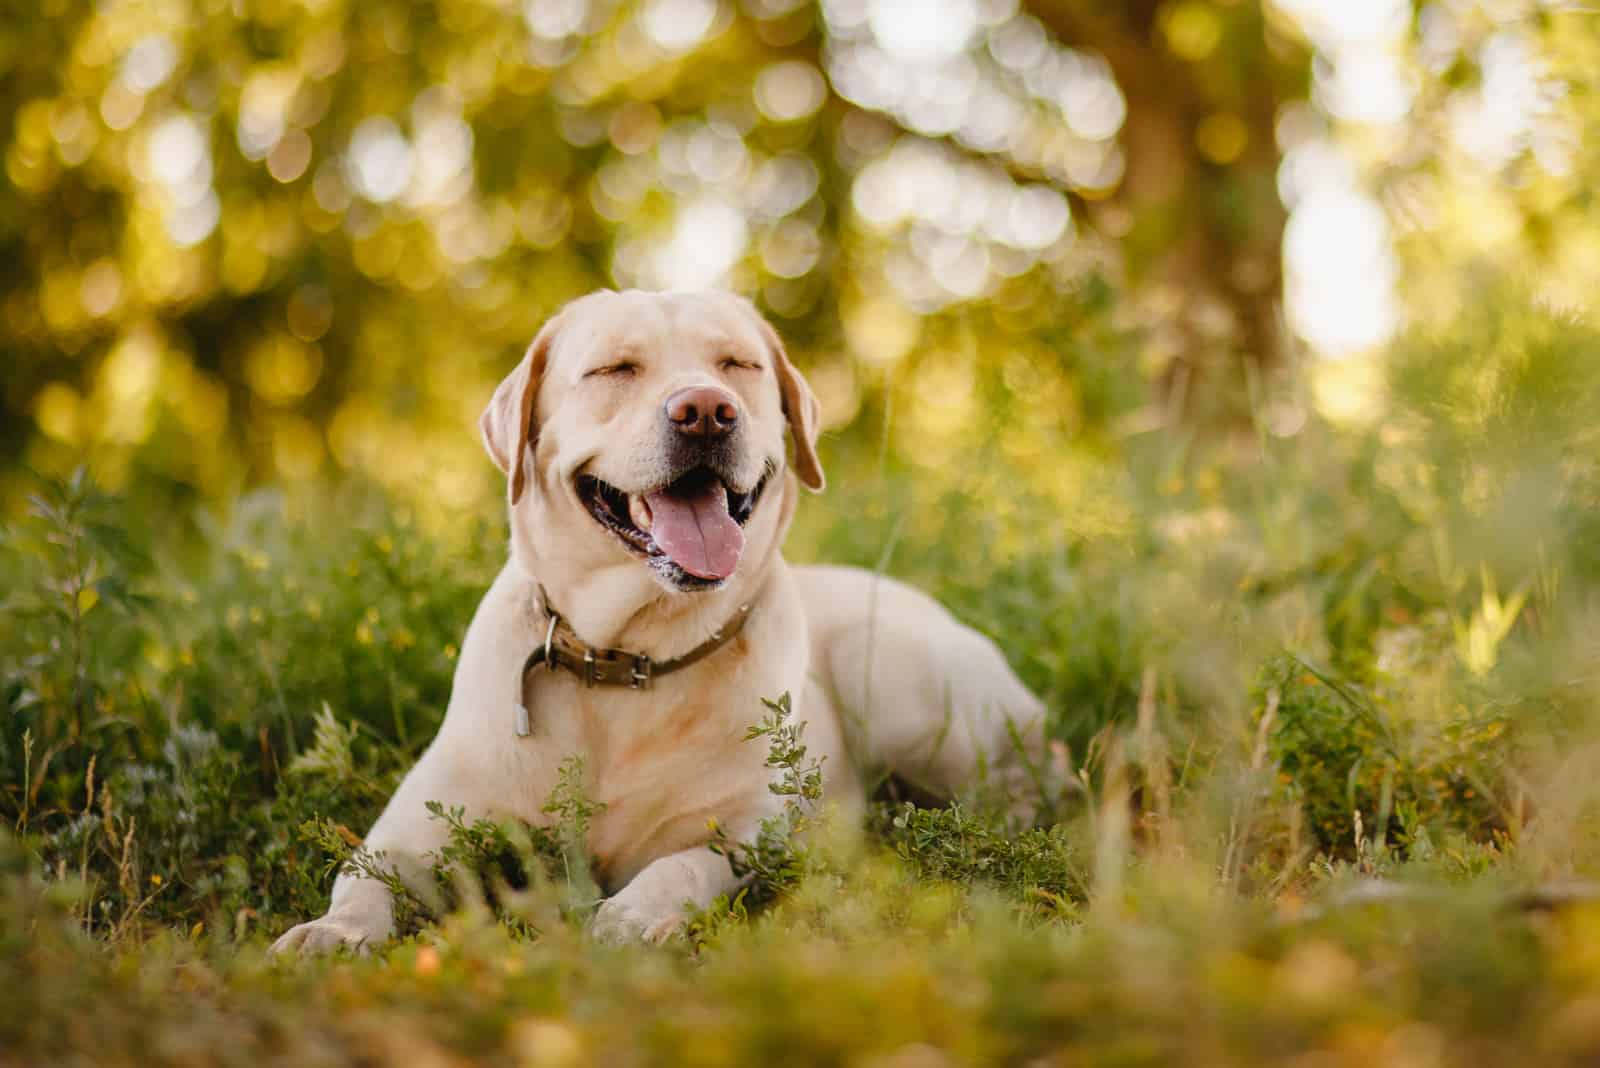 smile and happy purebred labrador retriever dog outdoors in grass park on sunny summer day